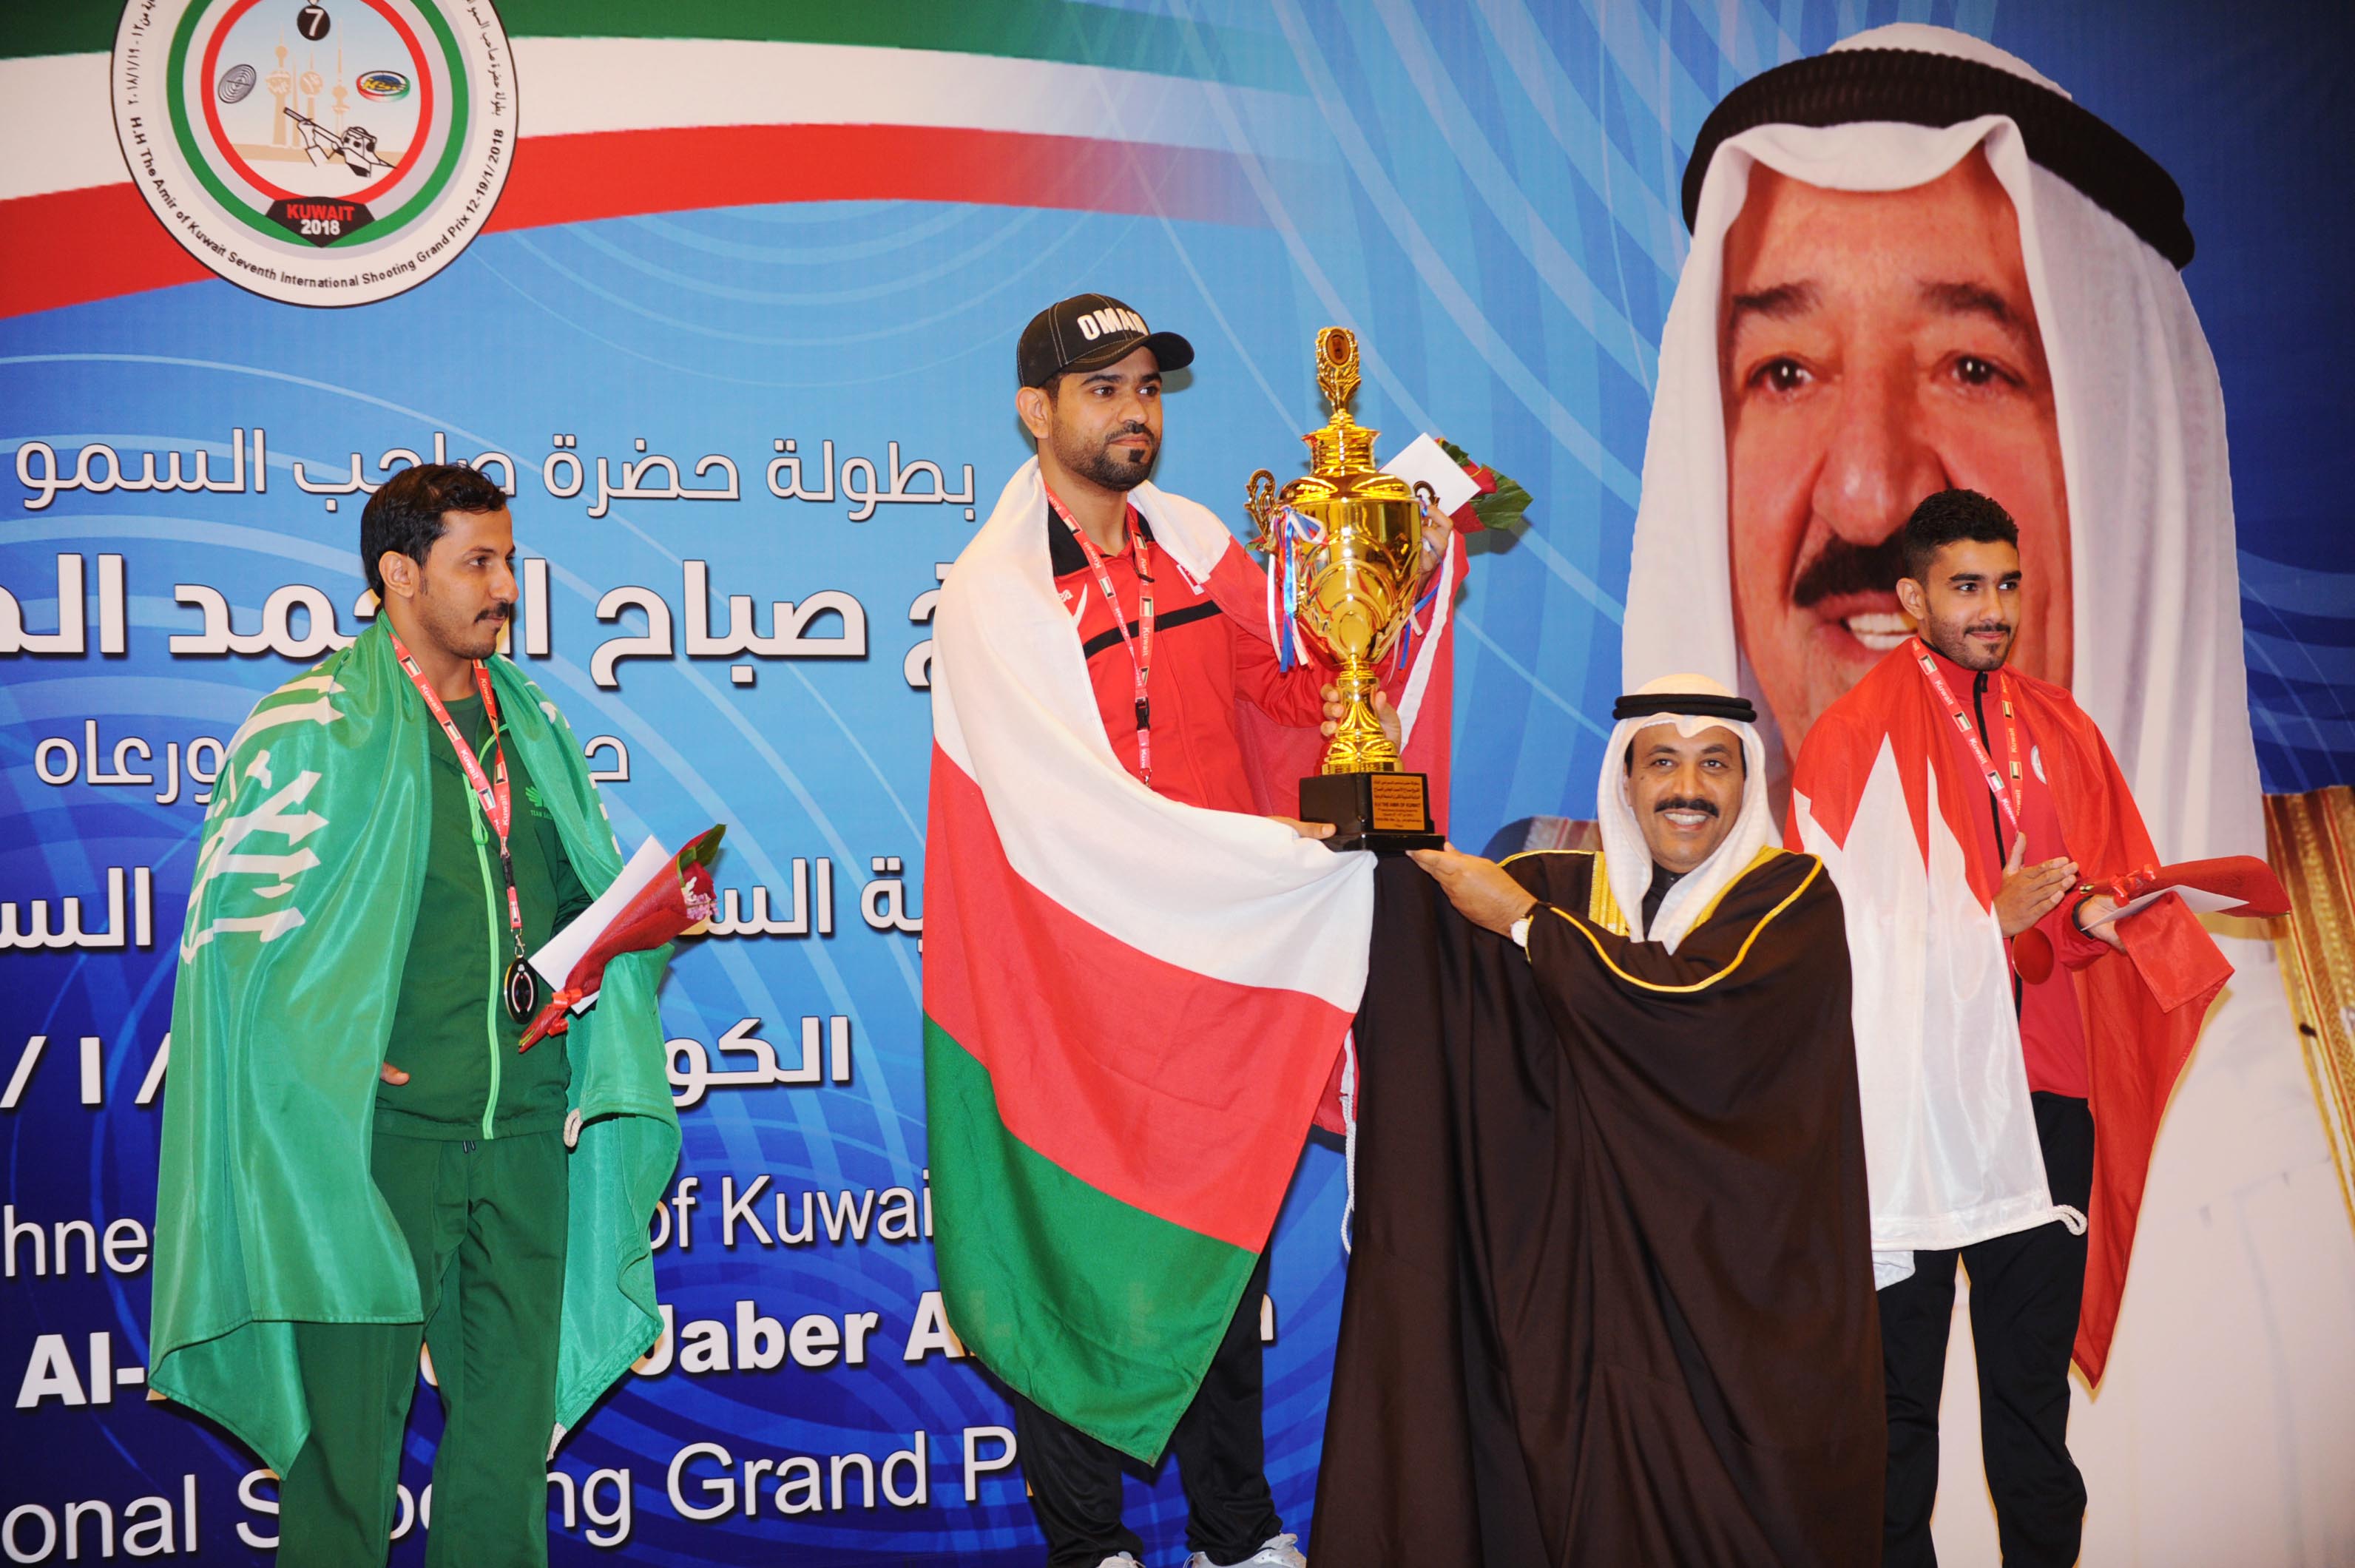 Oman win 1st gold medal at His Highness the Amir shooting tourney